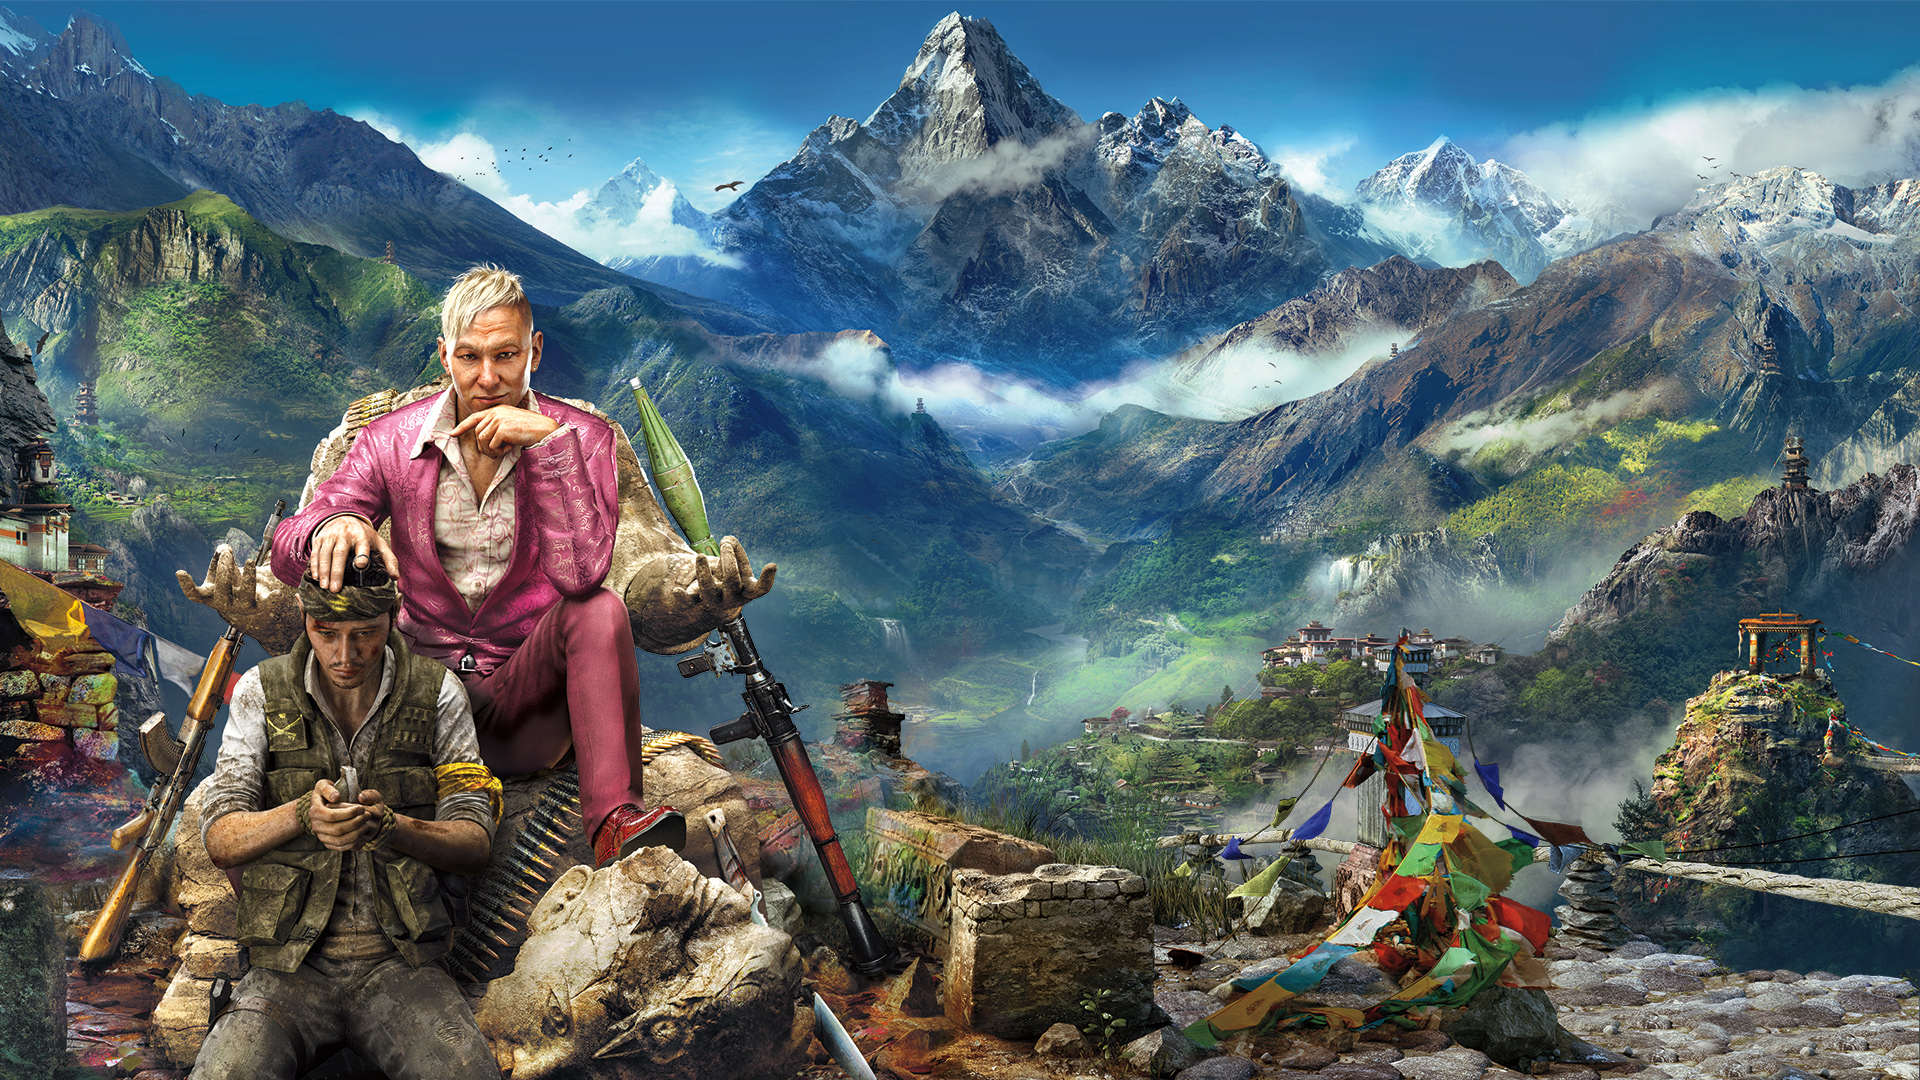 far cry 4 key code not on steam